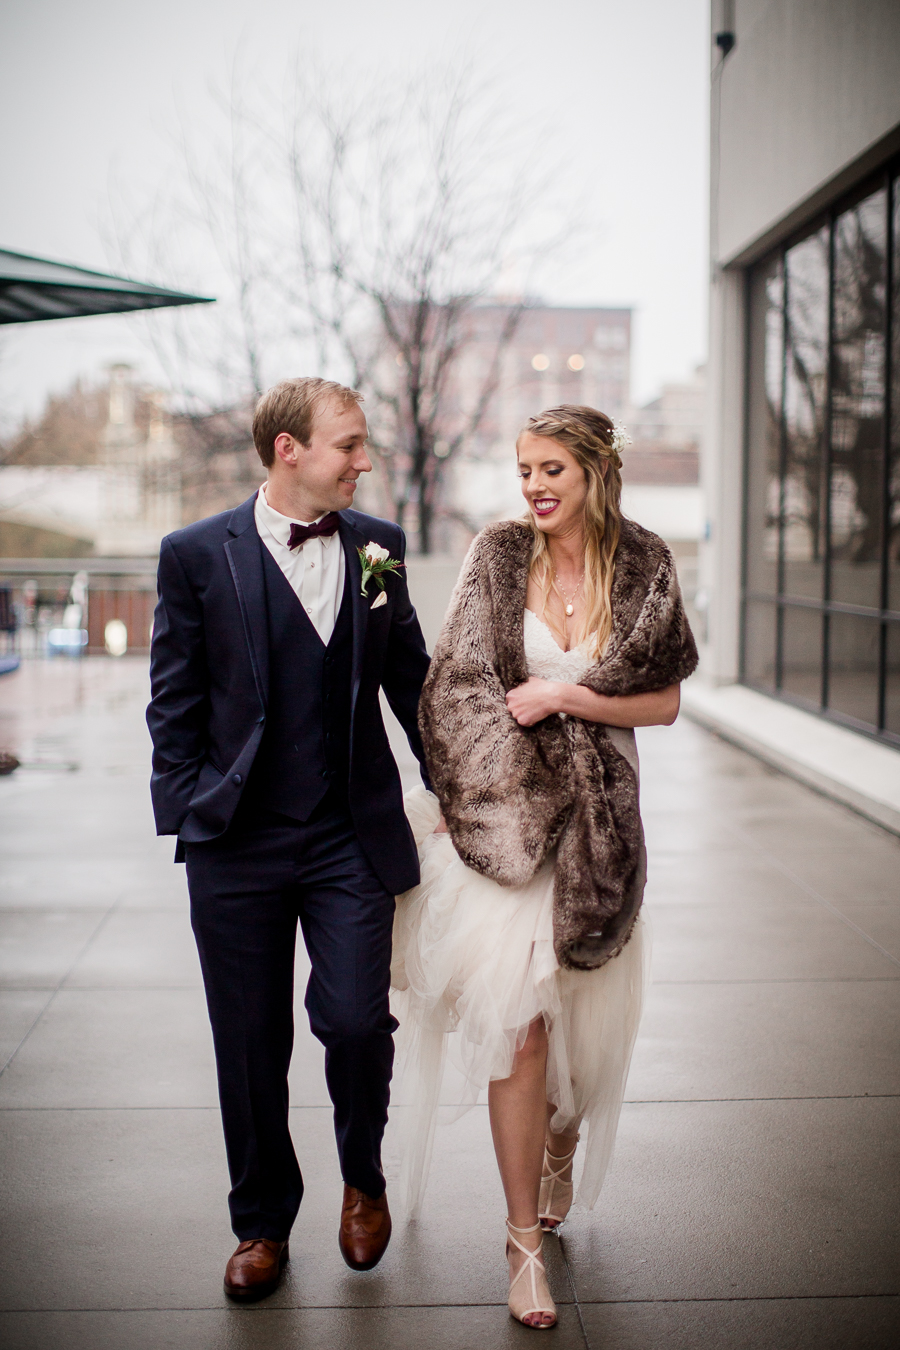 Walking together during the bride and groom romantic portraits at this winter wedding at Knoxville Wedding Venue, Jackson Terminal, by Knoxville Wedding Photographer, Amanda May Photos.